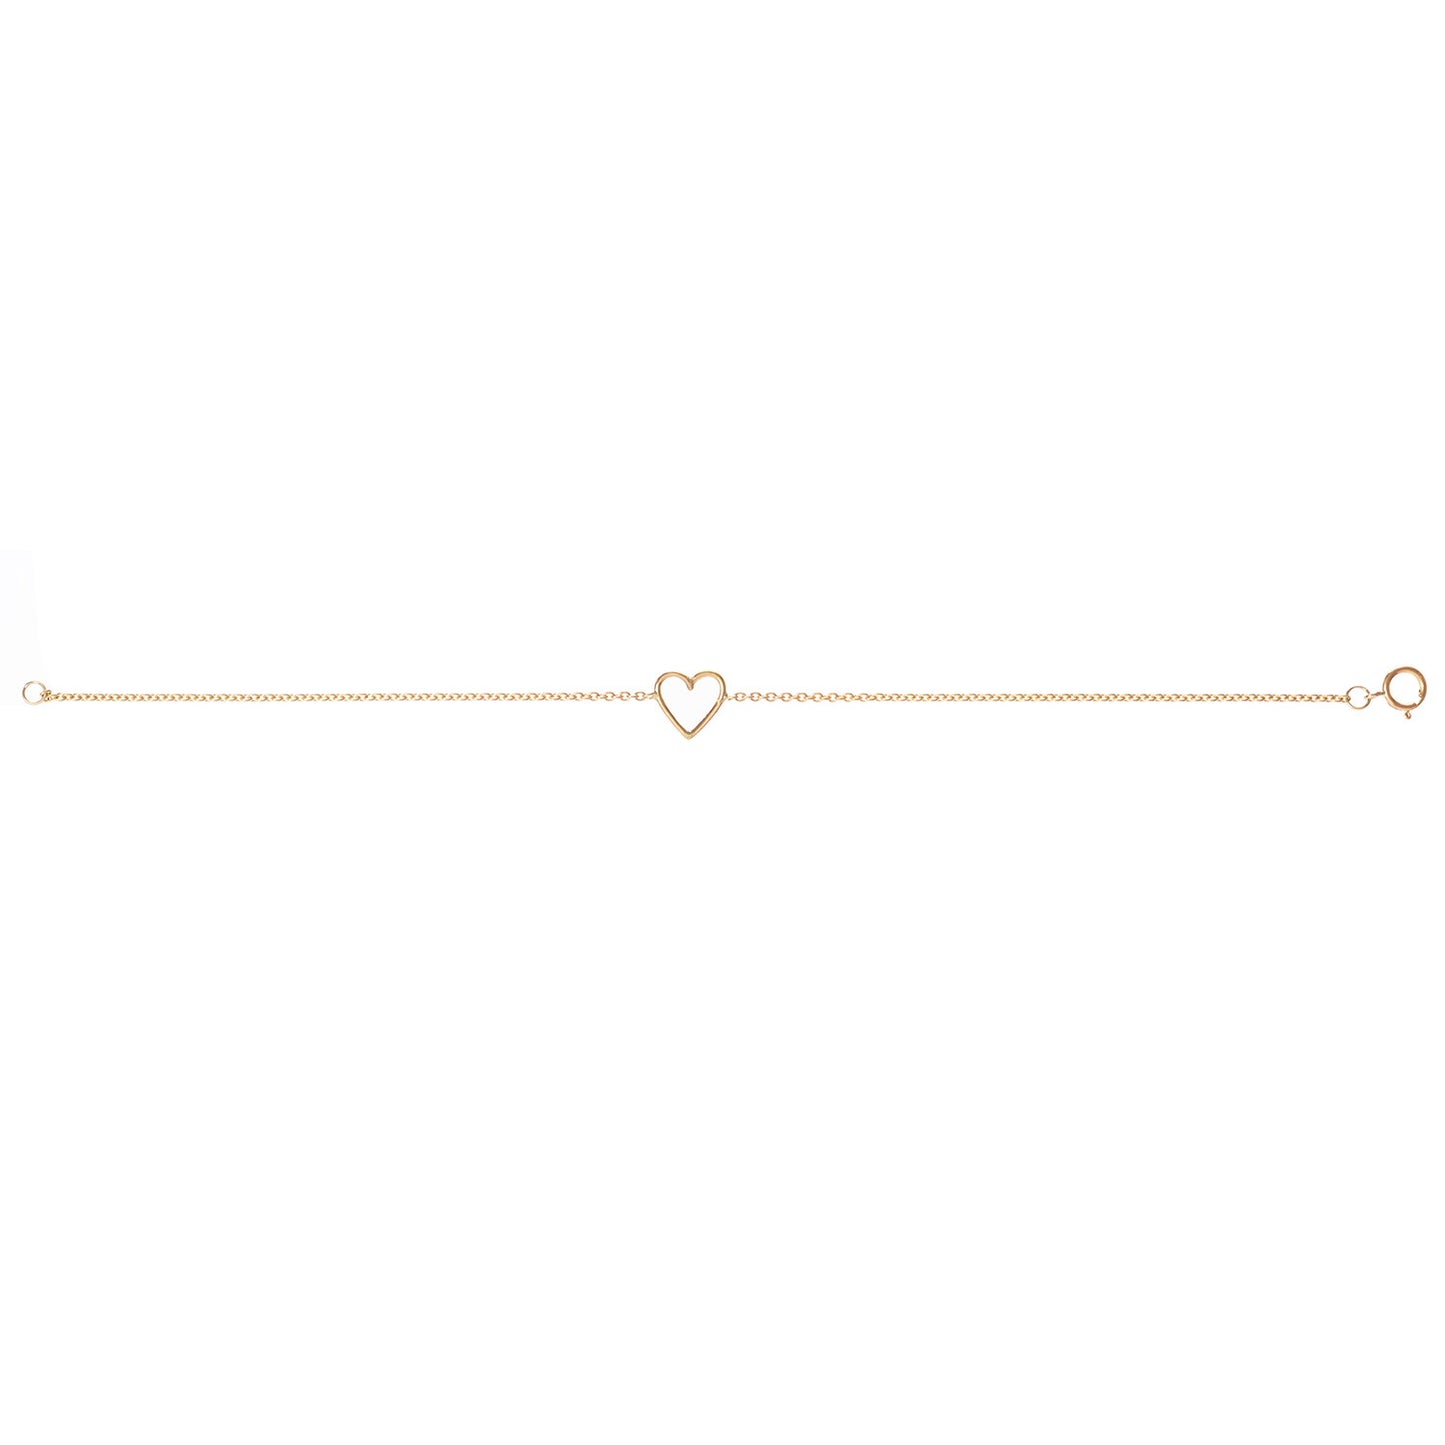 18ct yellow gold Heart Bracelet full length picture by McFarlane Fine Jewellery